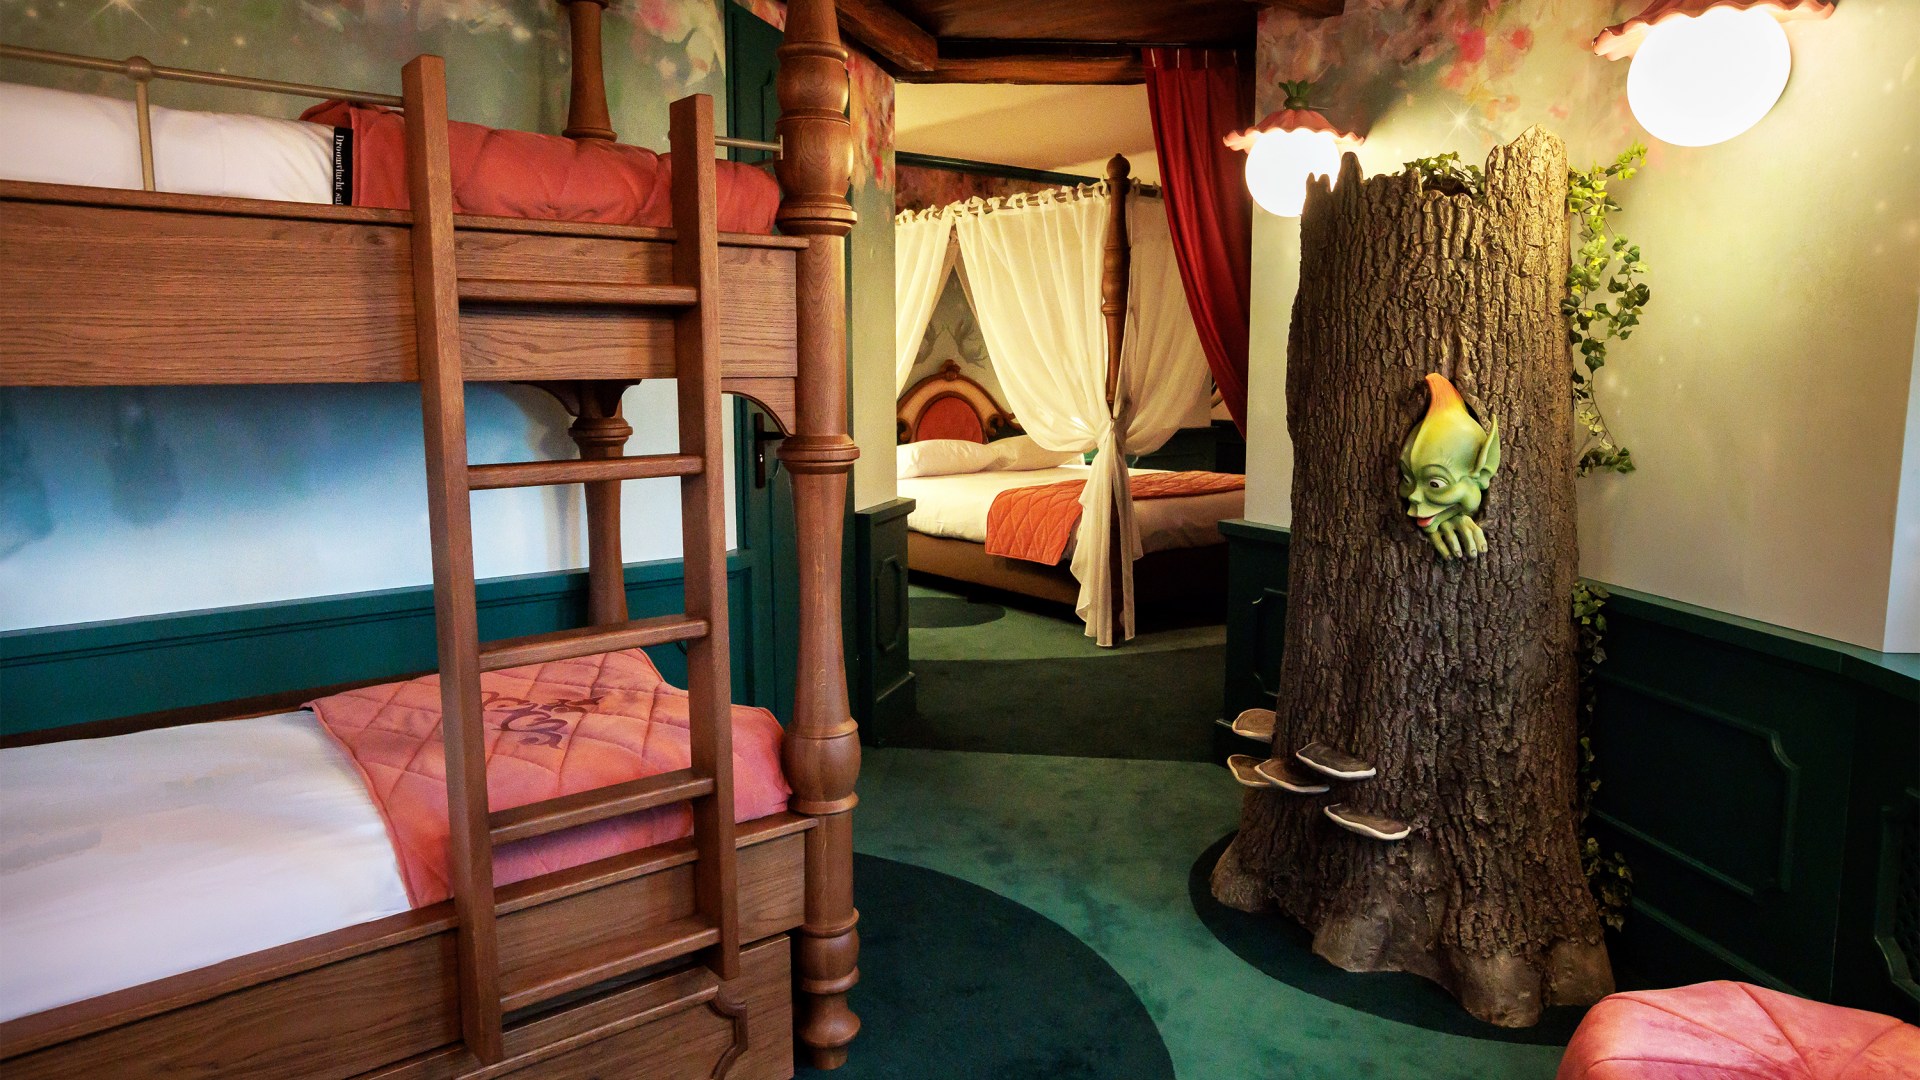 Uncover the Enchanting Fairytale Suite with Hidden Beds and Enchanted Trees at the Ultimate Theme Park Destination, Beyond Disneyland’s Magic